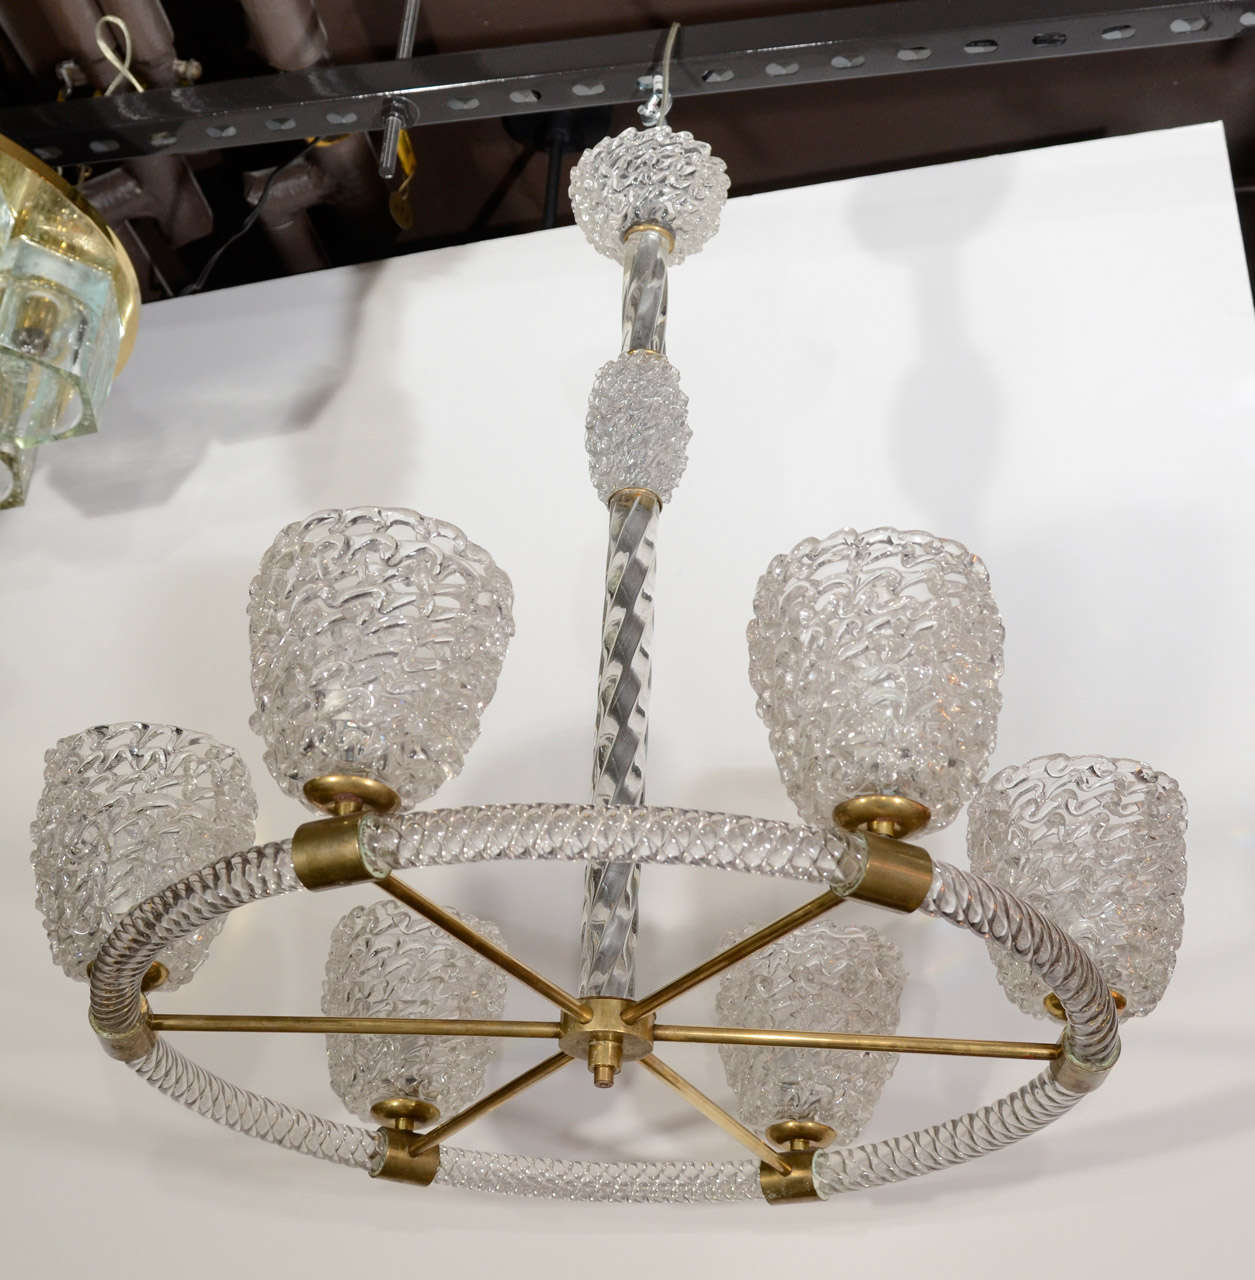 Exquisite hand blown Murano glass chandelier with circular design. The chandelier features six textured glass globe shades with hand formed wave or rippled patterns held by stylized bronze fittings. Frame is comprised of spiral blown glass elements